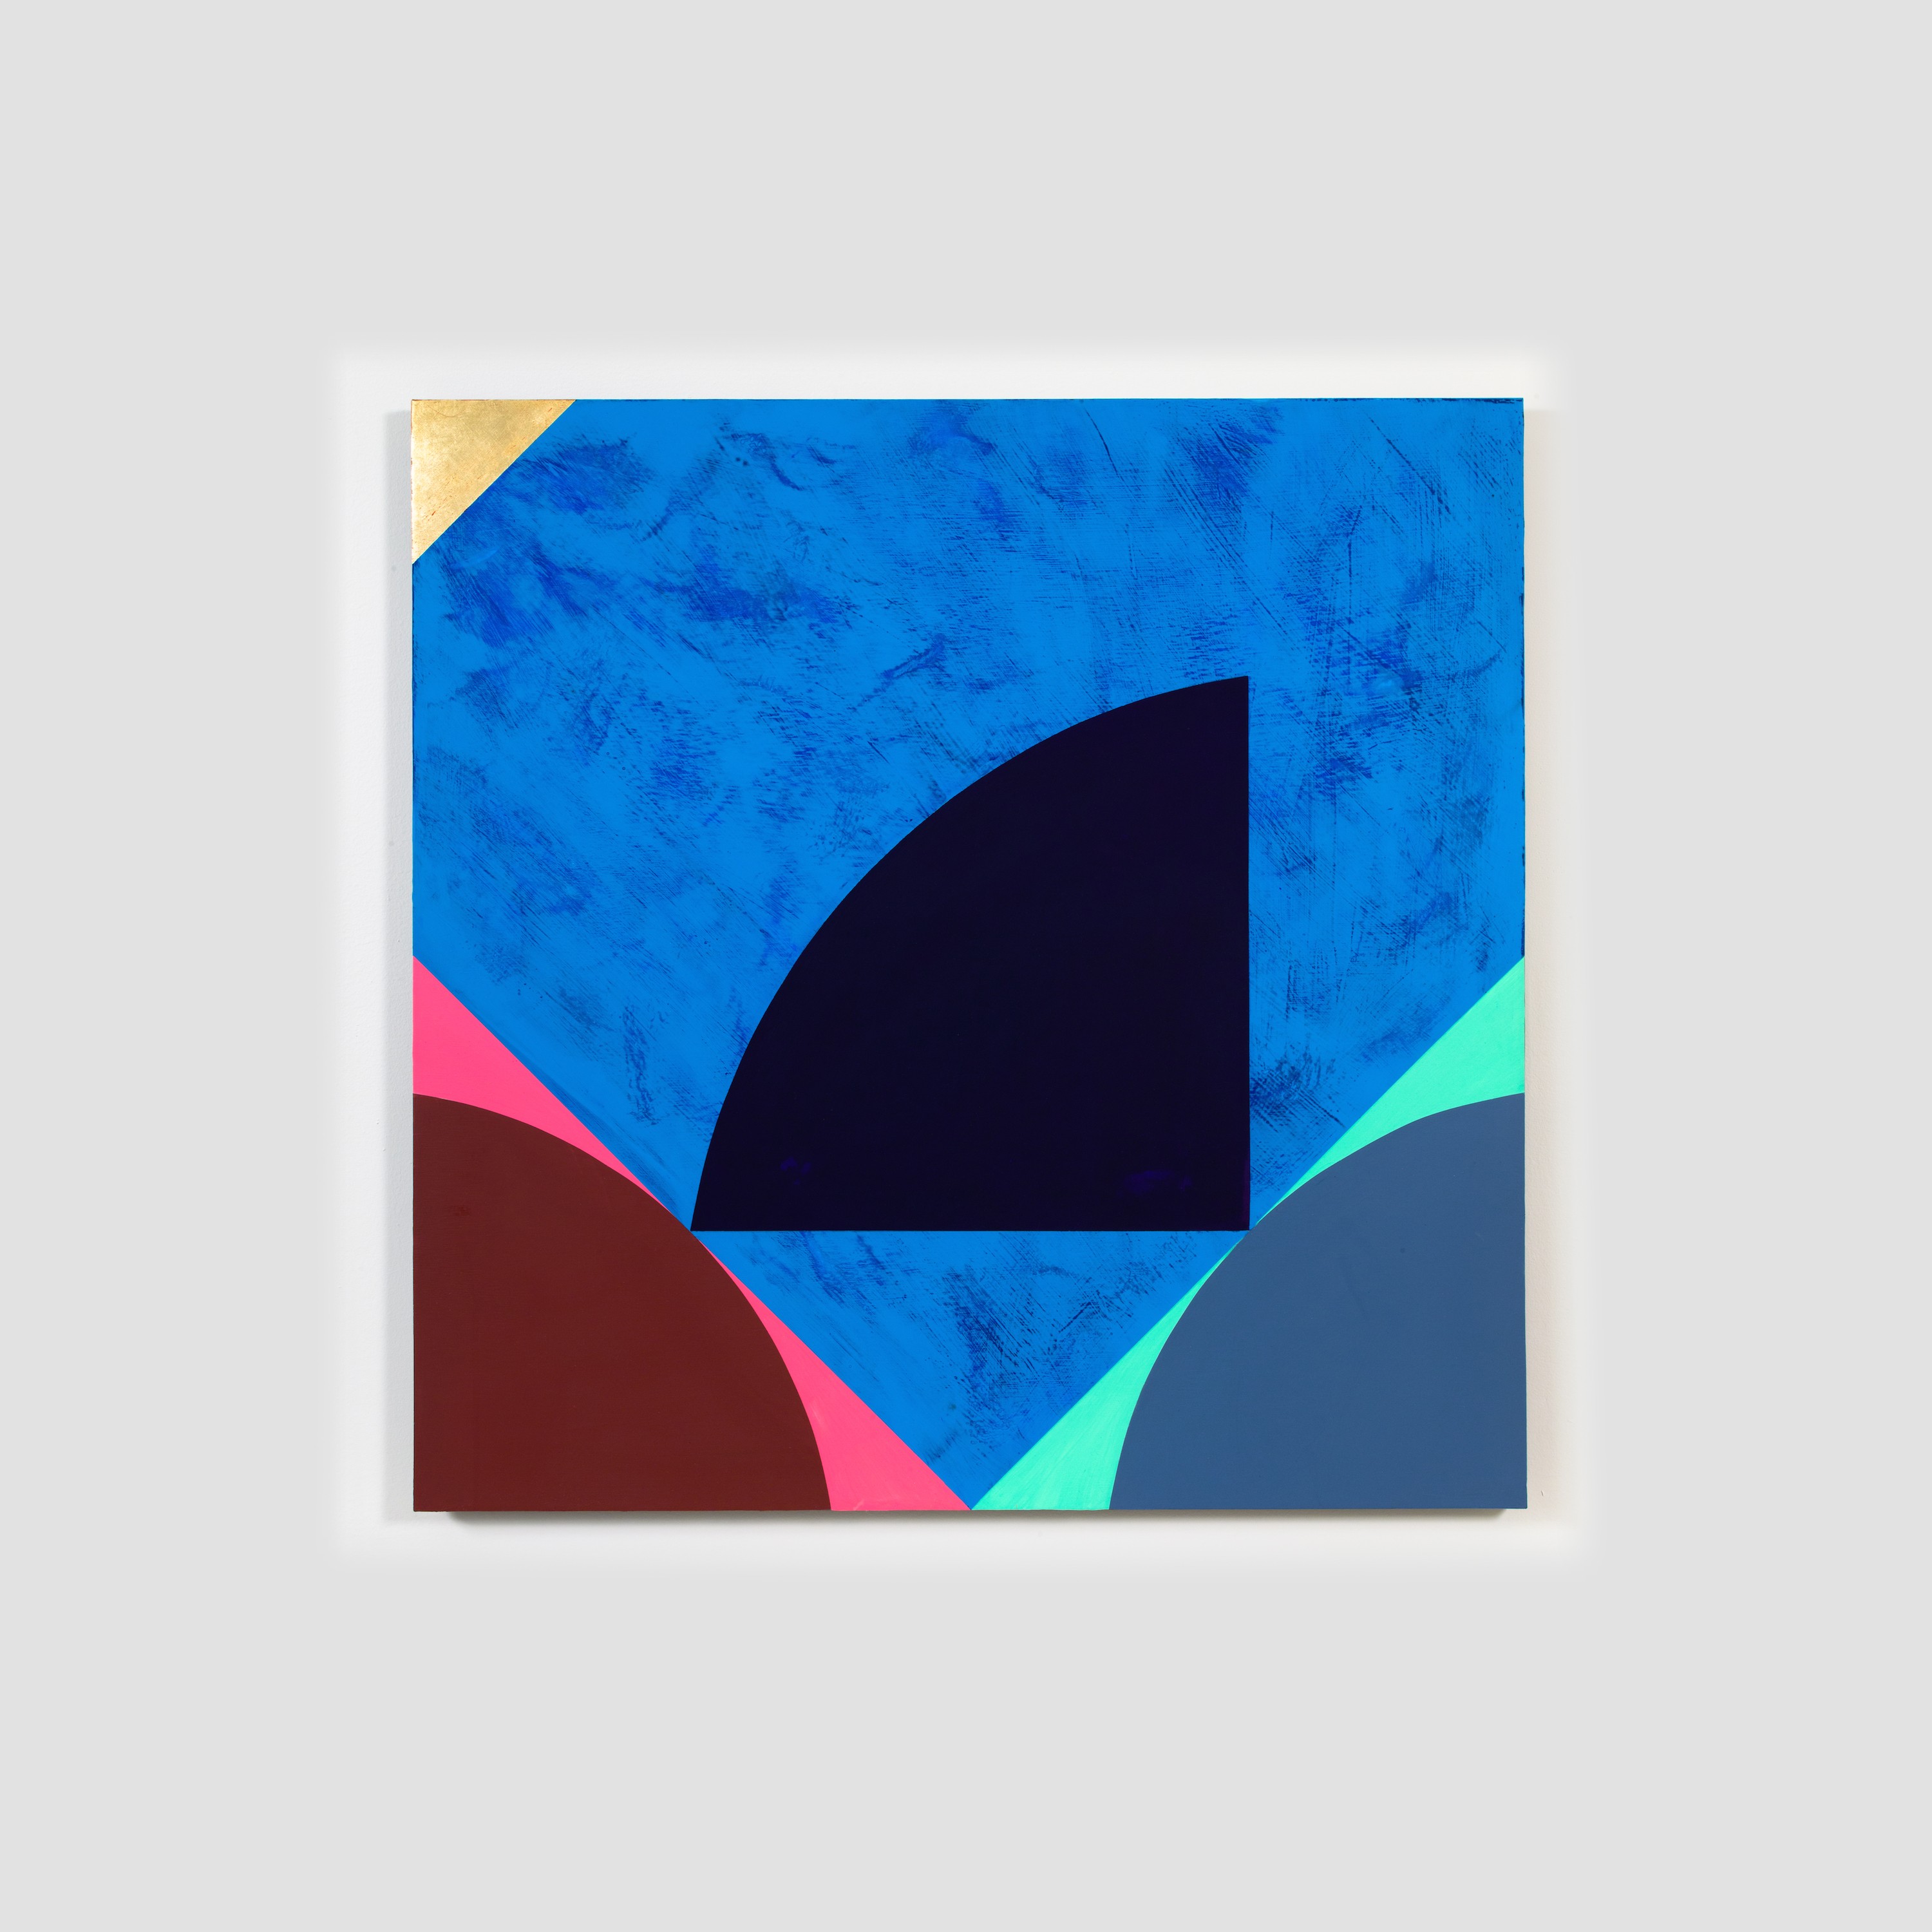 3i_SUN STARE _2A (2019). Pigment, gold leaf, acrylic and oil on wood 34” x 34” (86.4 x 86.4 cm)